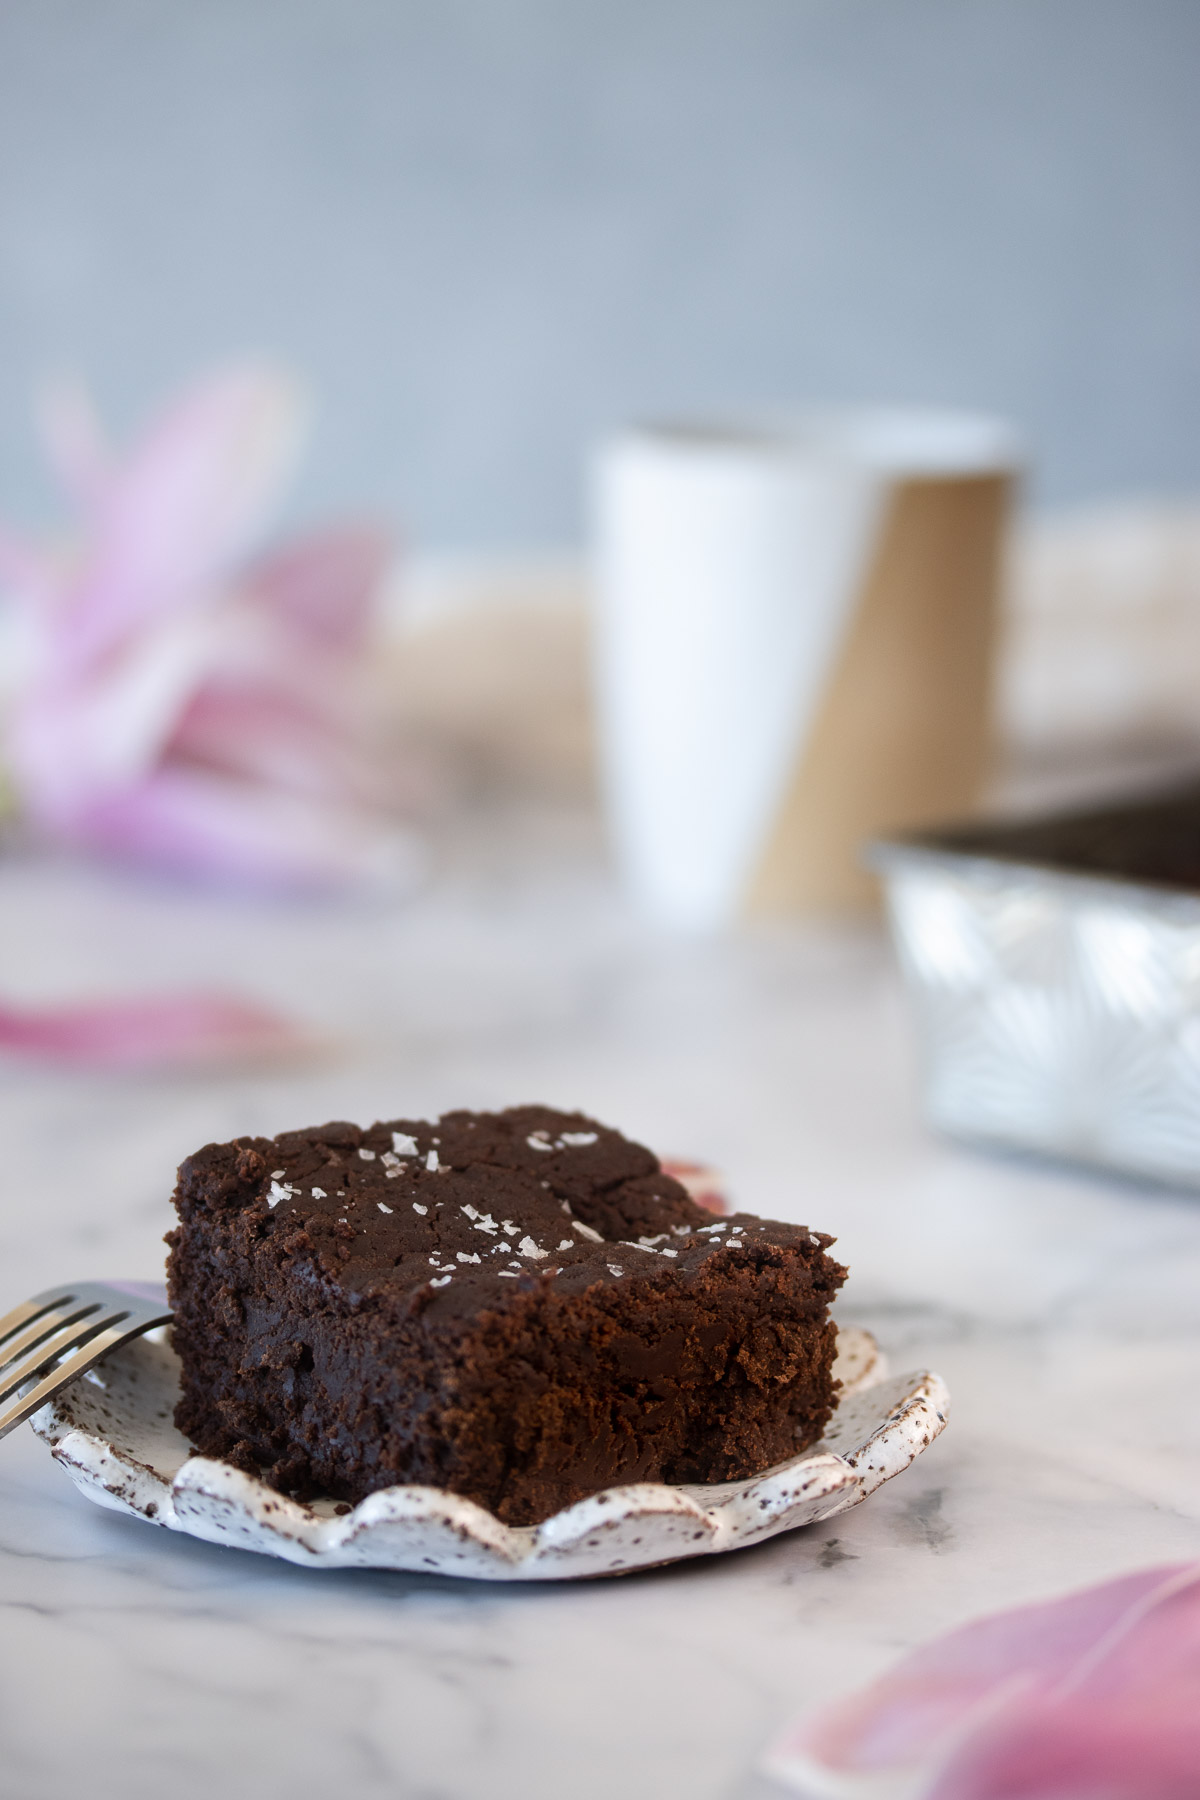 A single brownie, ready to be savoured